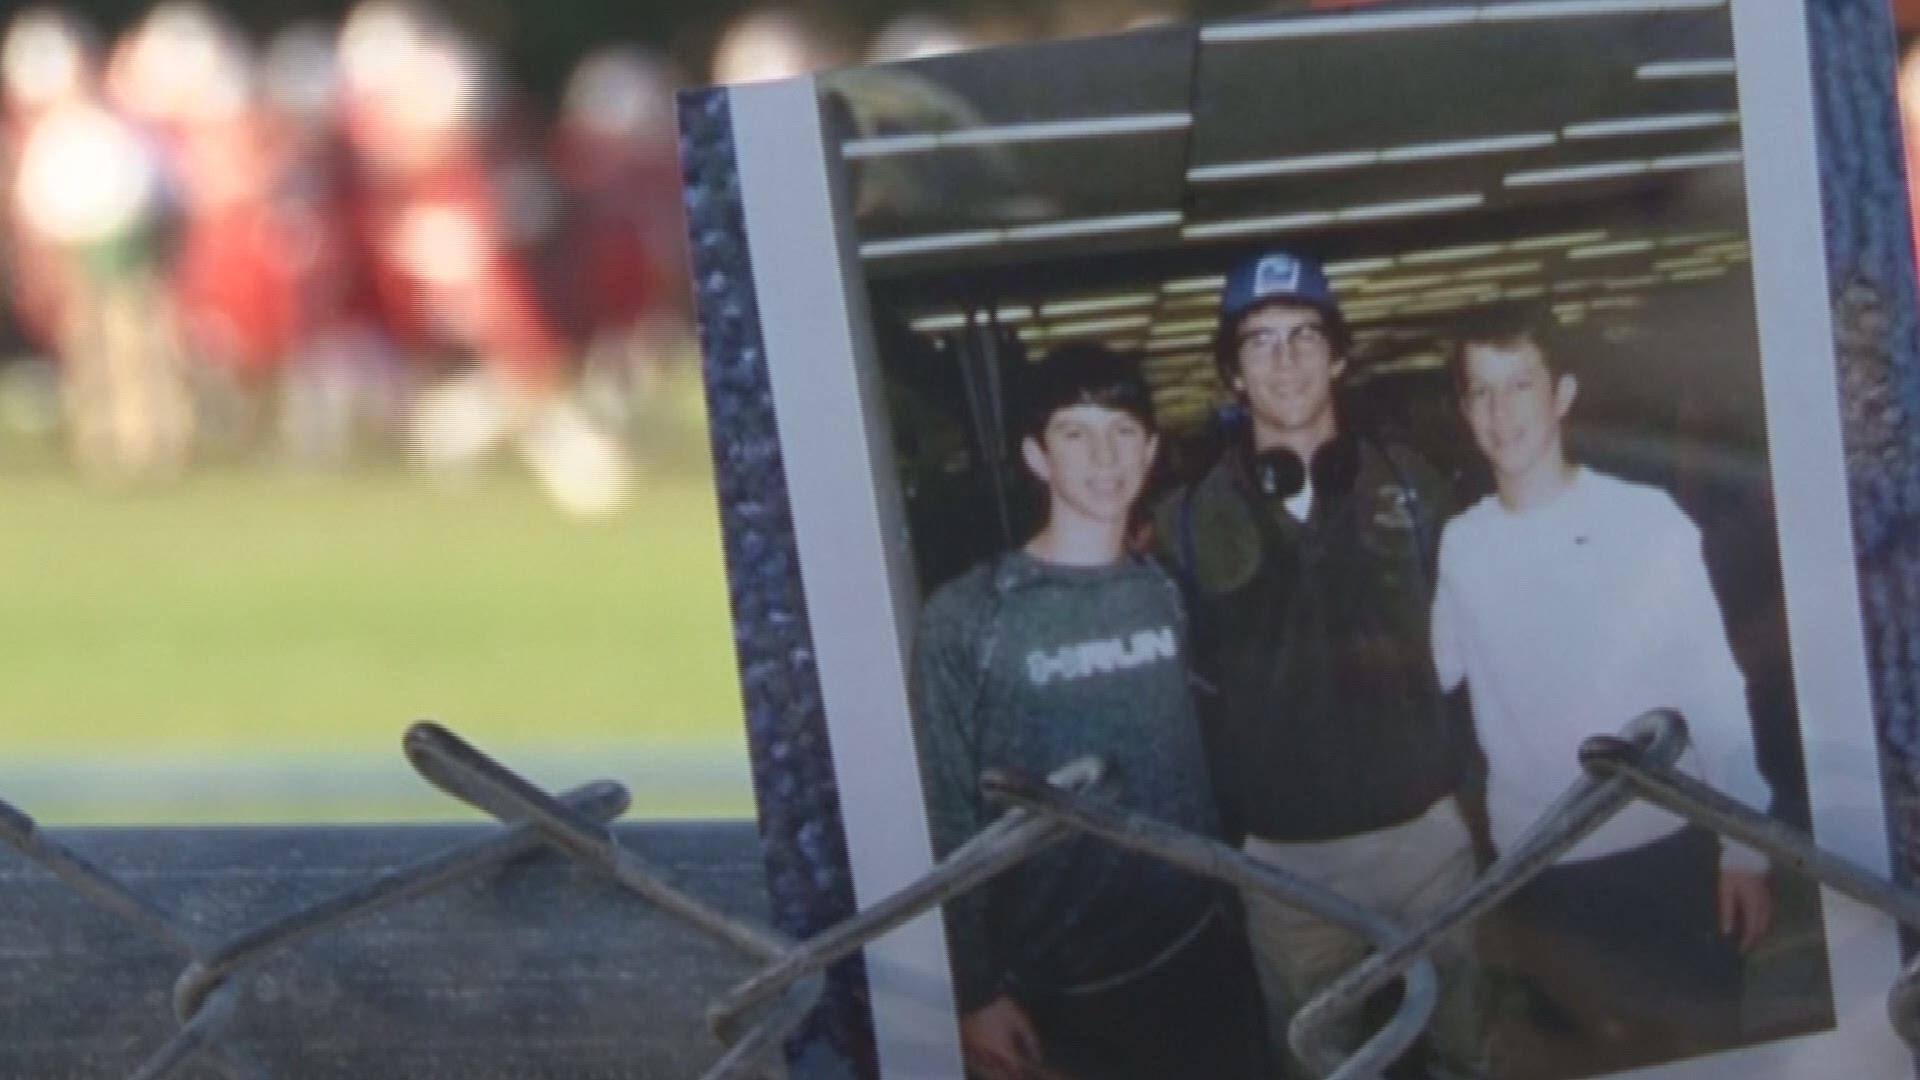 Sports Reporter Mia O'Brien traces Stetson Bennett's "route" from undersized, Pierce County recruit to QB1 for the University of Georgia, with help from his family.